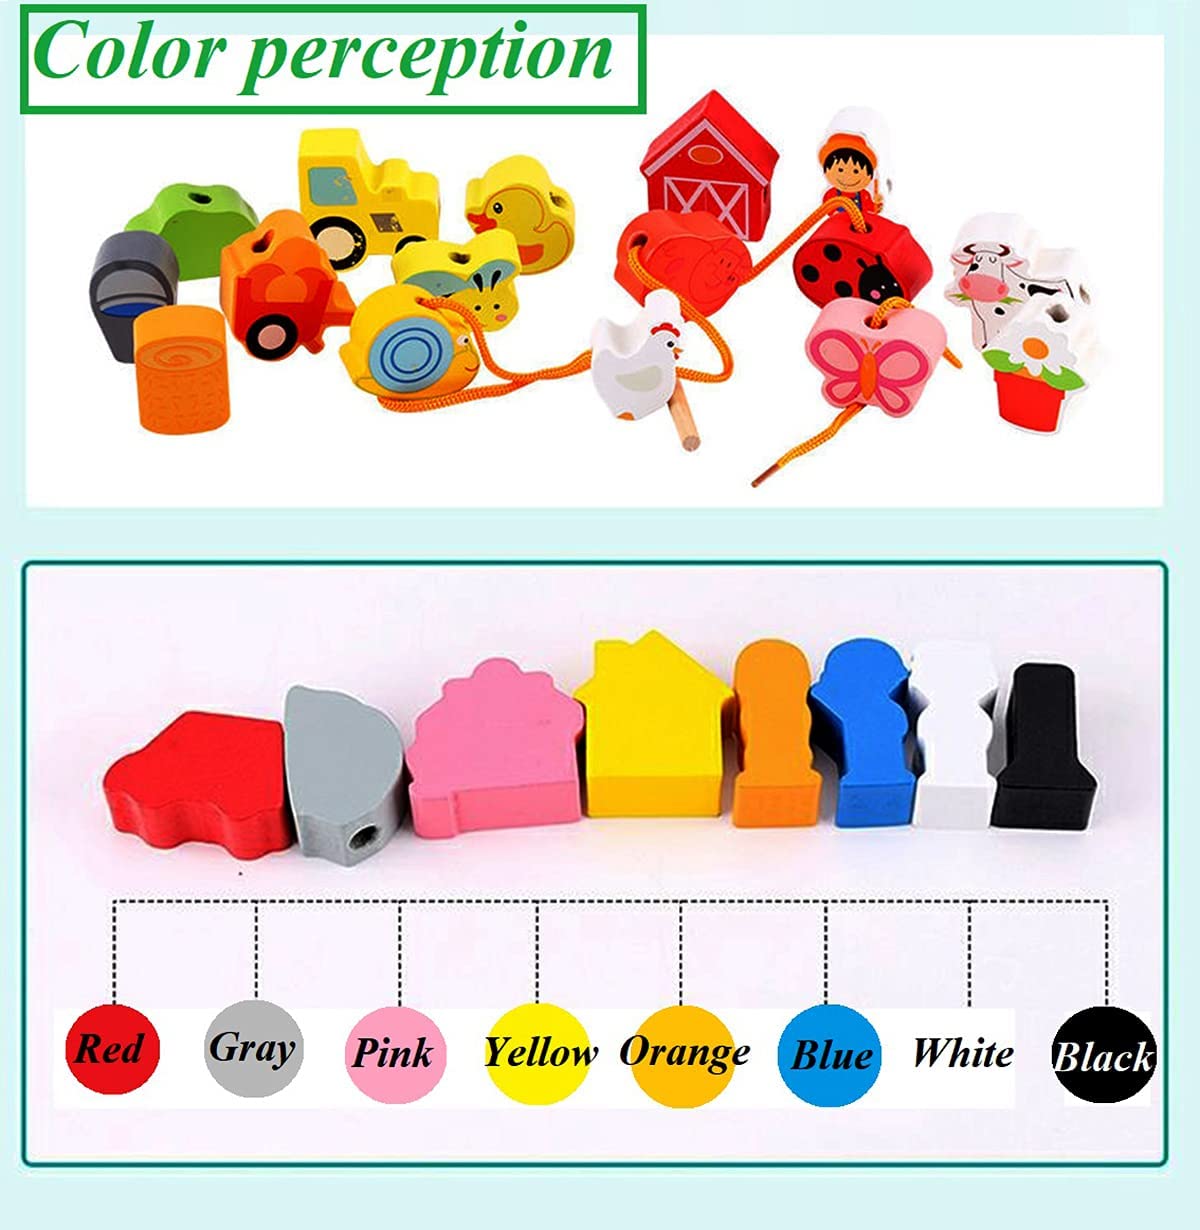 Farm Toy Wooden Block Set, Early Educational Toys String & Lacing Beads Games for Toddlers Kids Farm Animal Learning Play Set